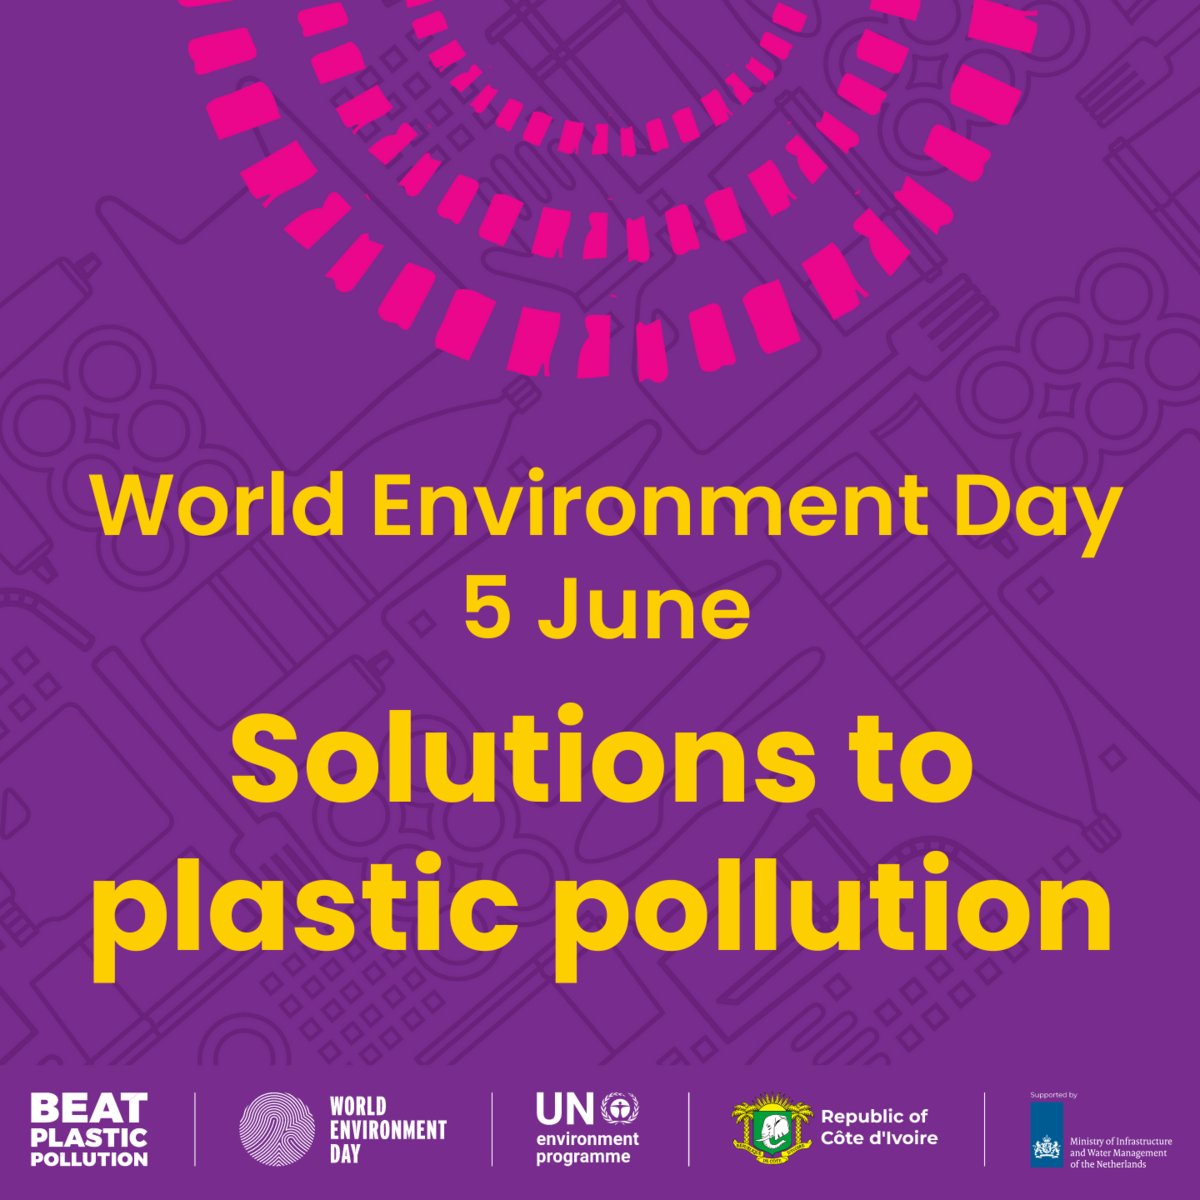 Monday is #WorldEnvironmentDay! Speak up for a better future. Join millions around the globe in calling for urgent action to #BeatPlasticPollution & protect our common future. worldenvironmentday.global via @UNEP